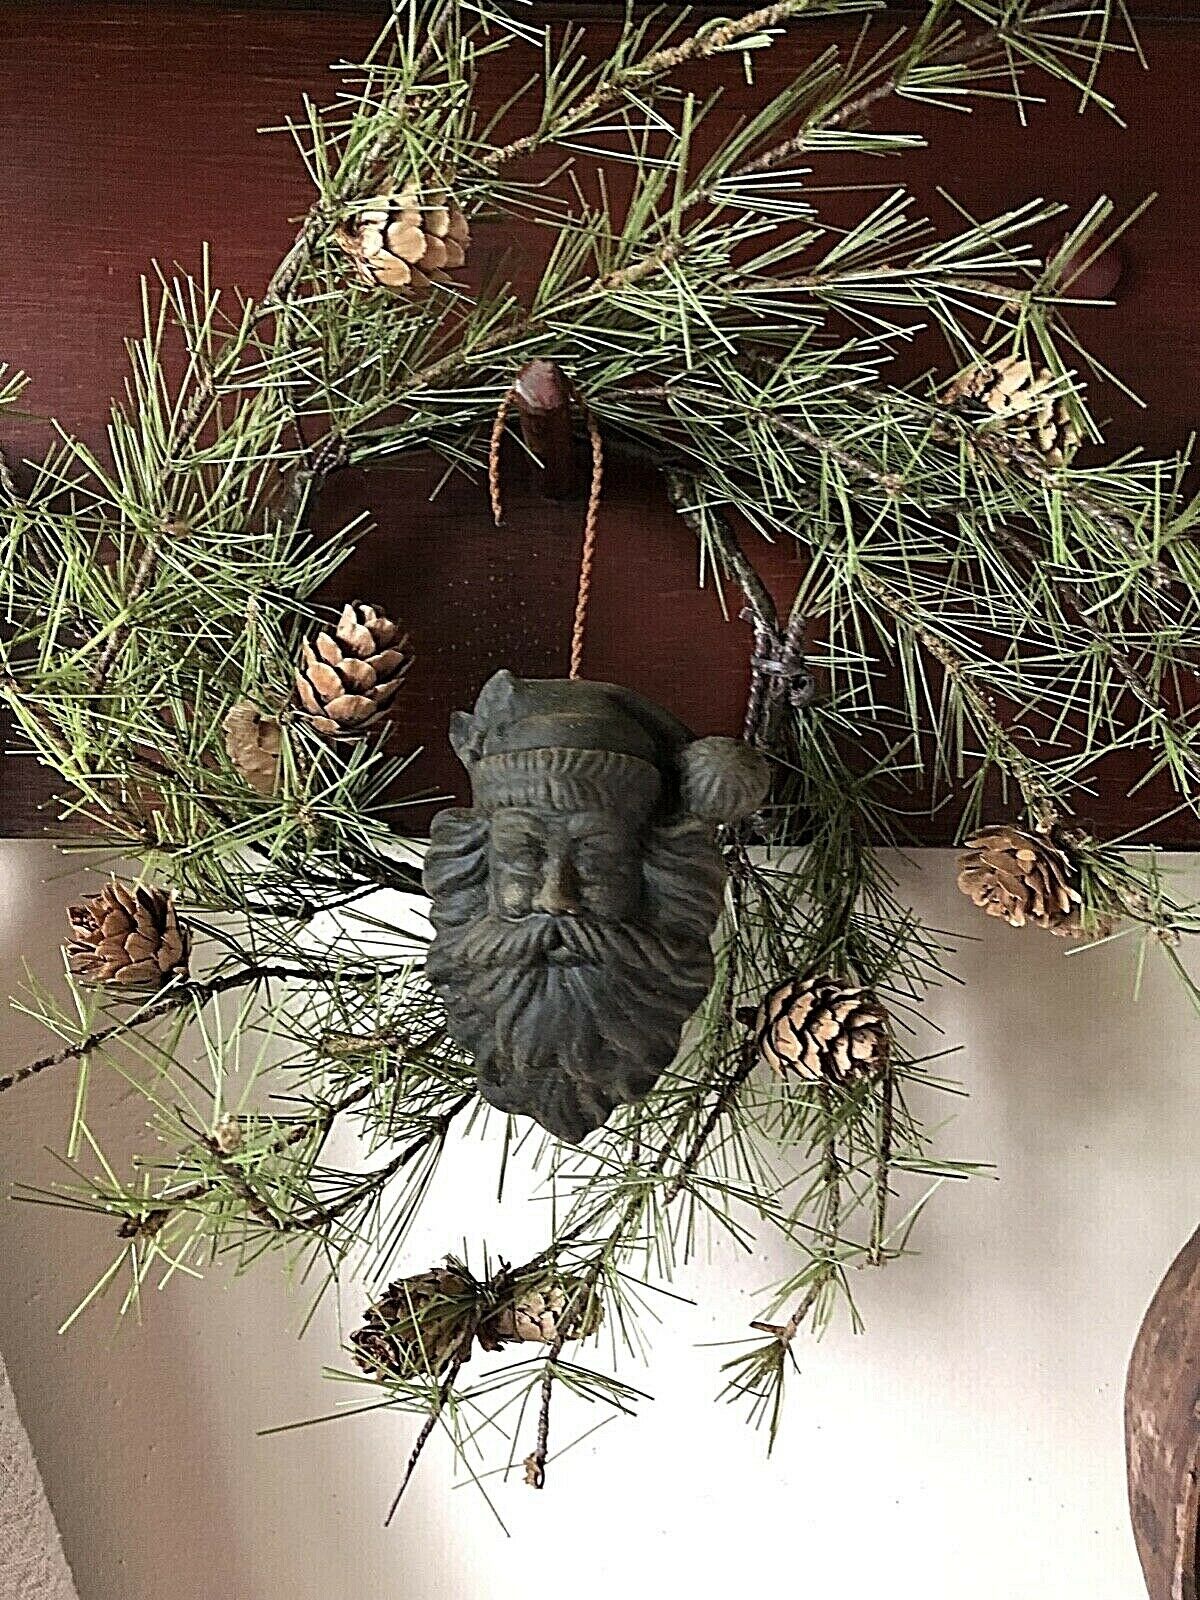 Primitive Country Blackened Beeswax Santa Face Ornament Christmas - The Primitive Pineapple Collection